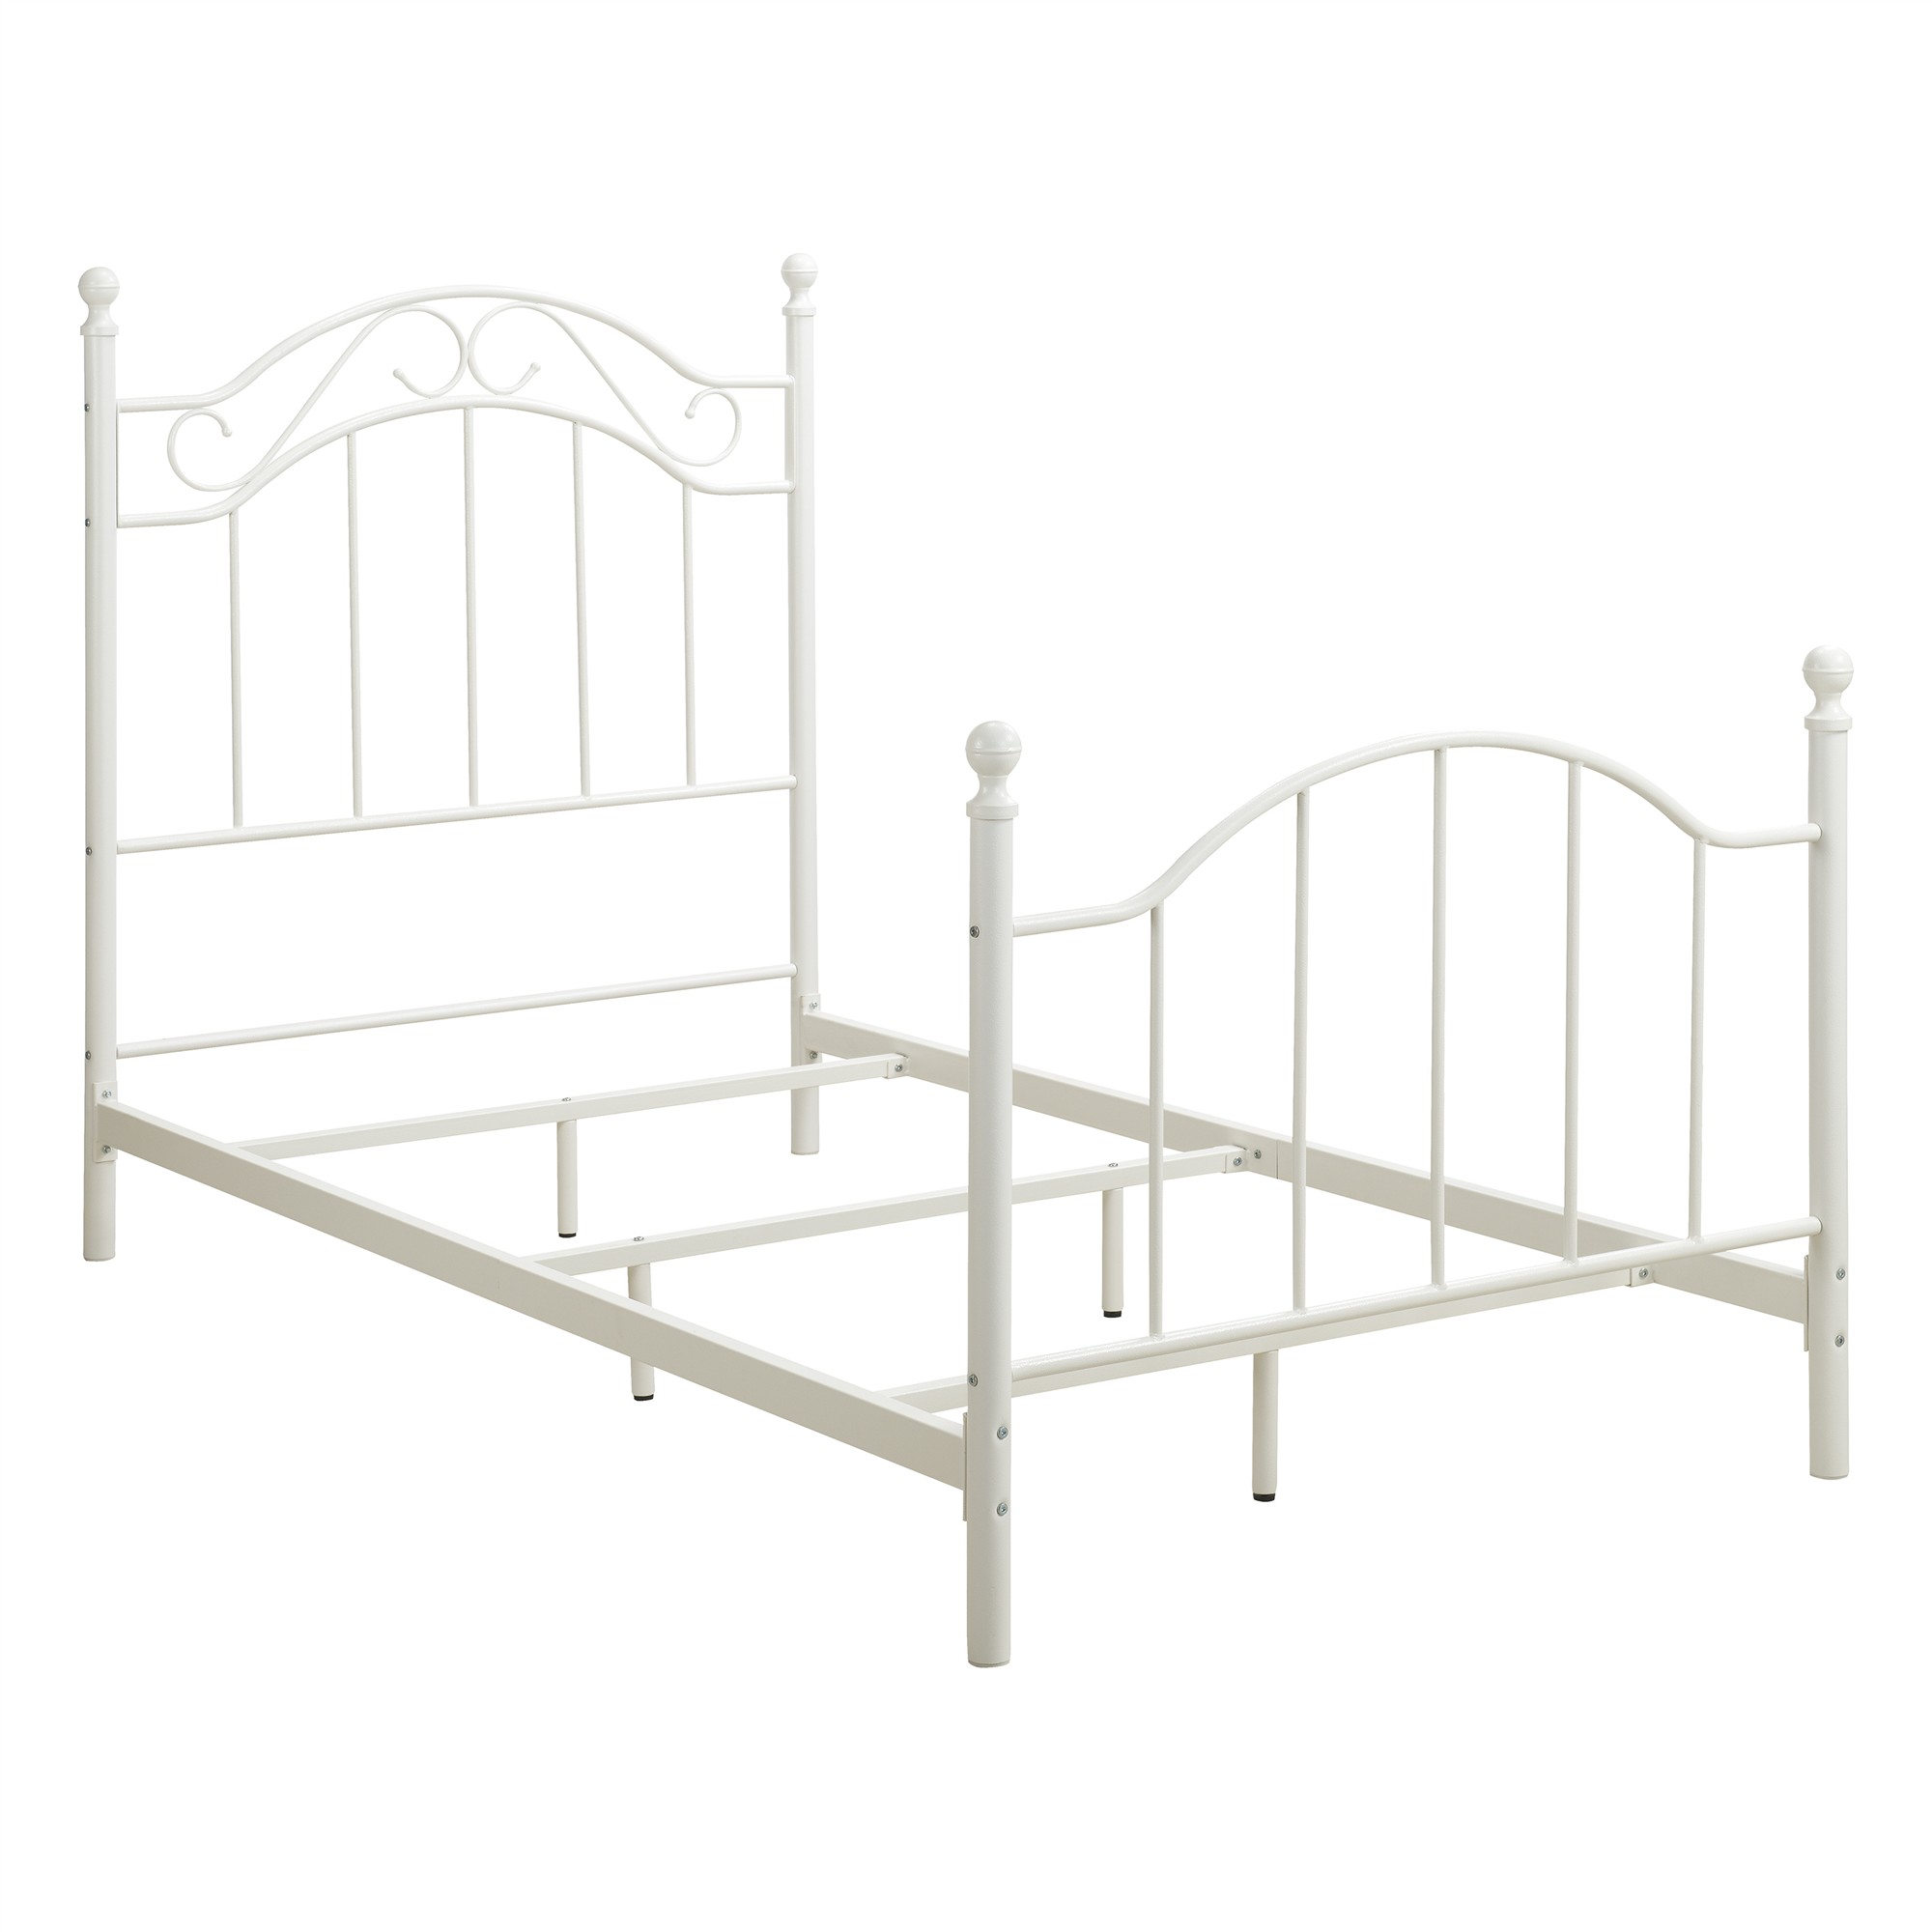 Mainstays Metal Bed, Bedroom Furniture, Twin Size Frame, White - image 3 of 16